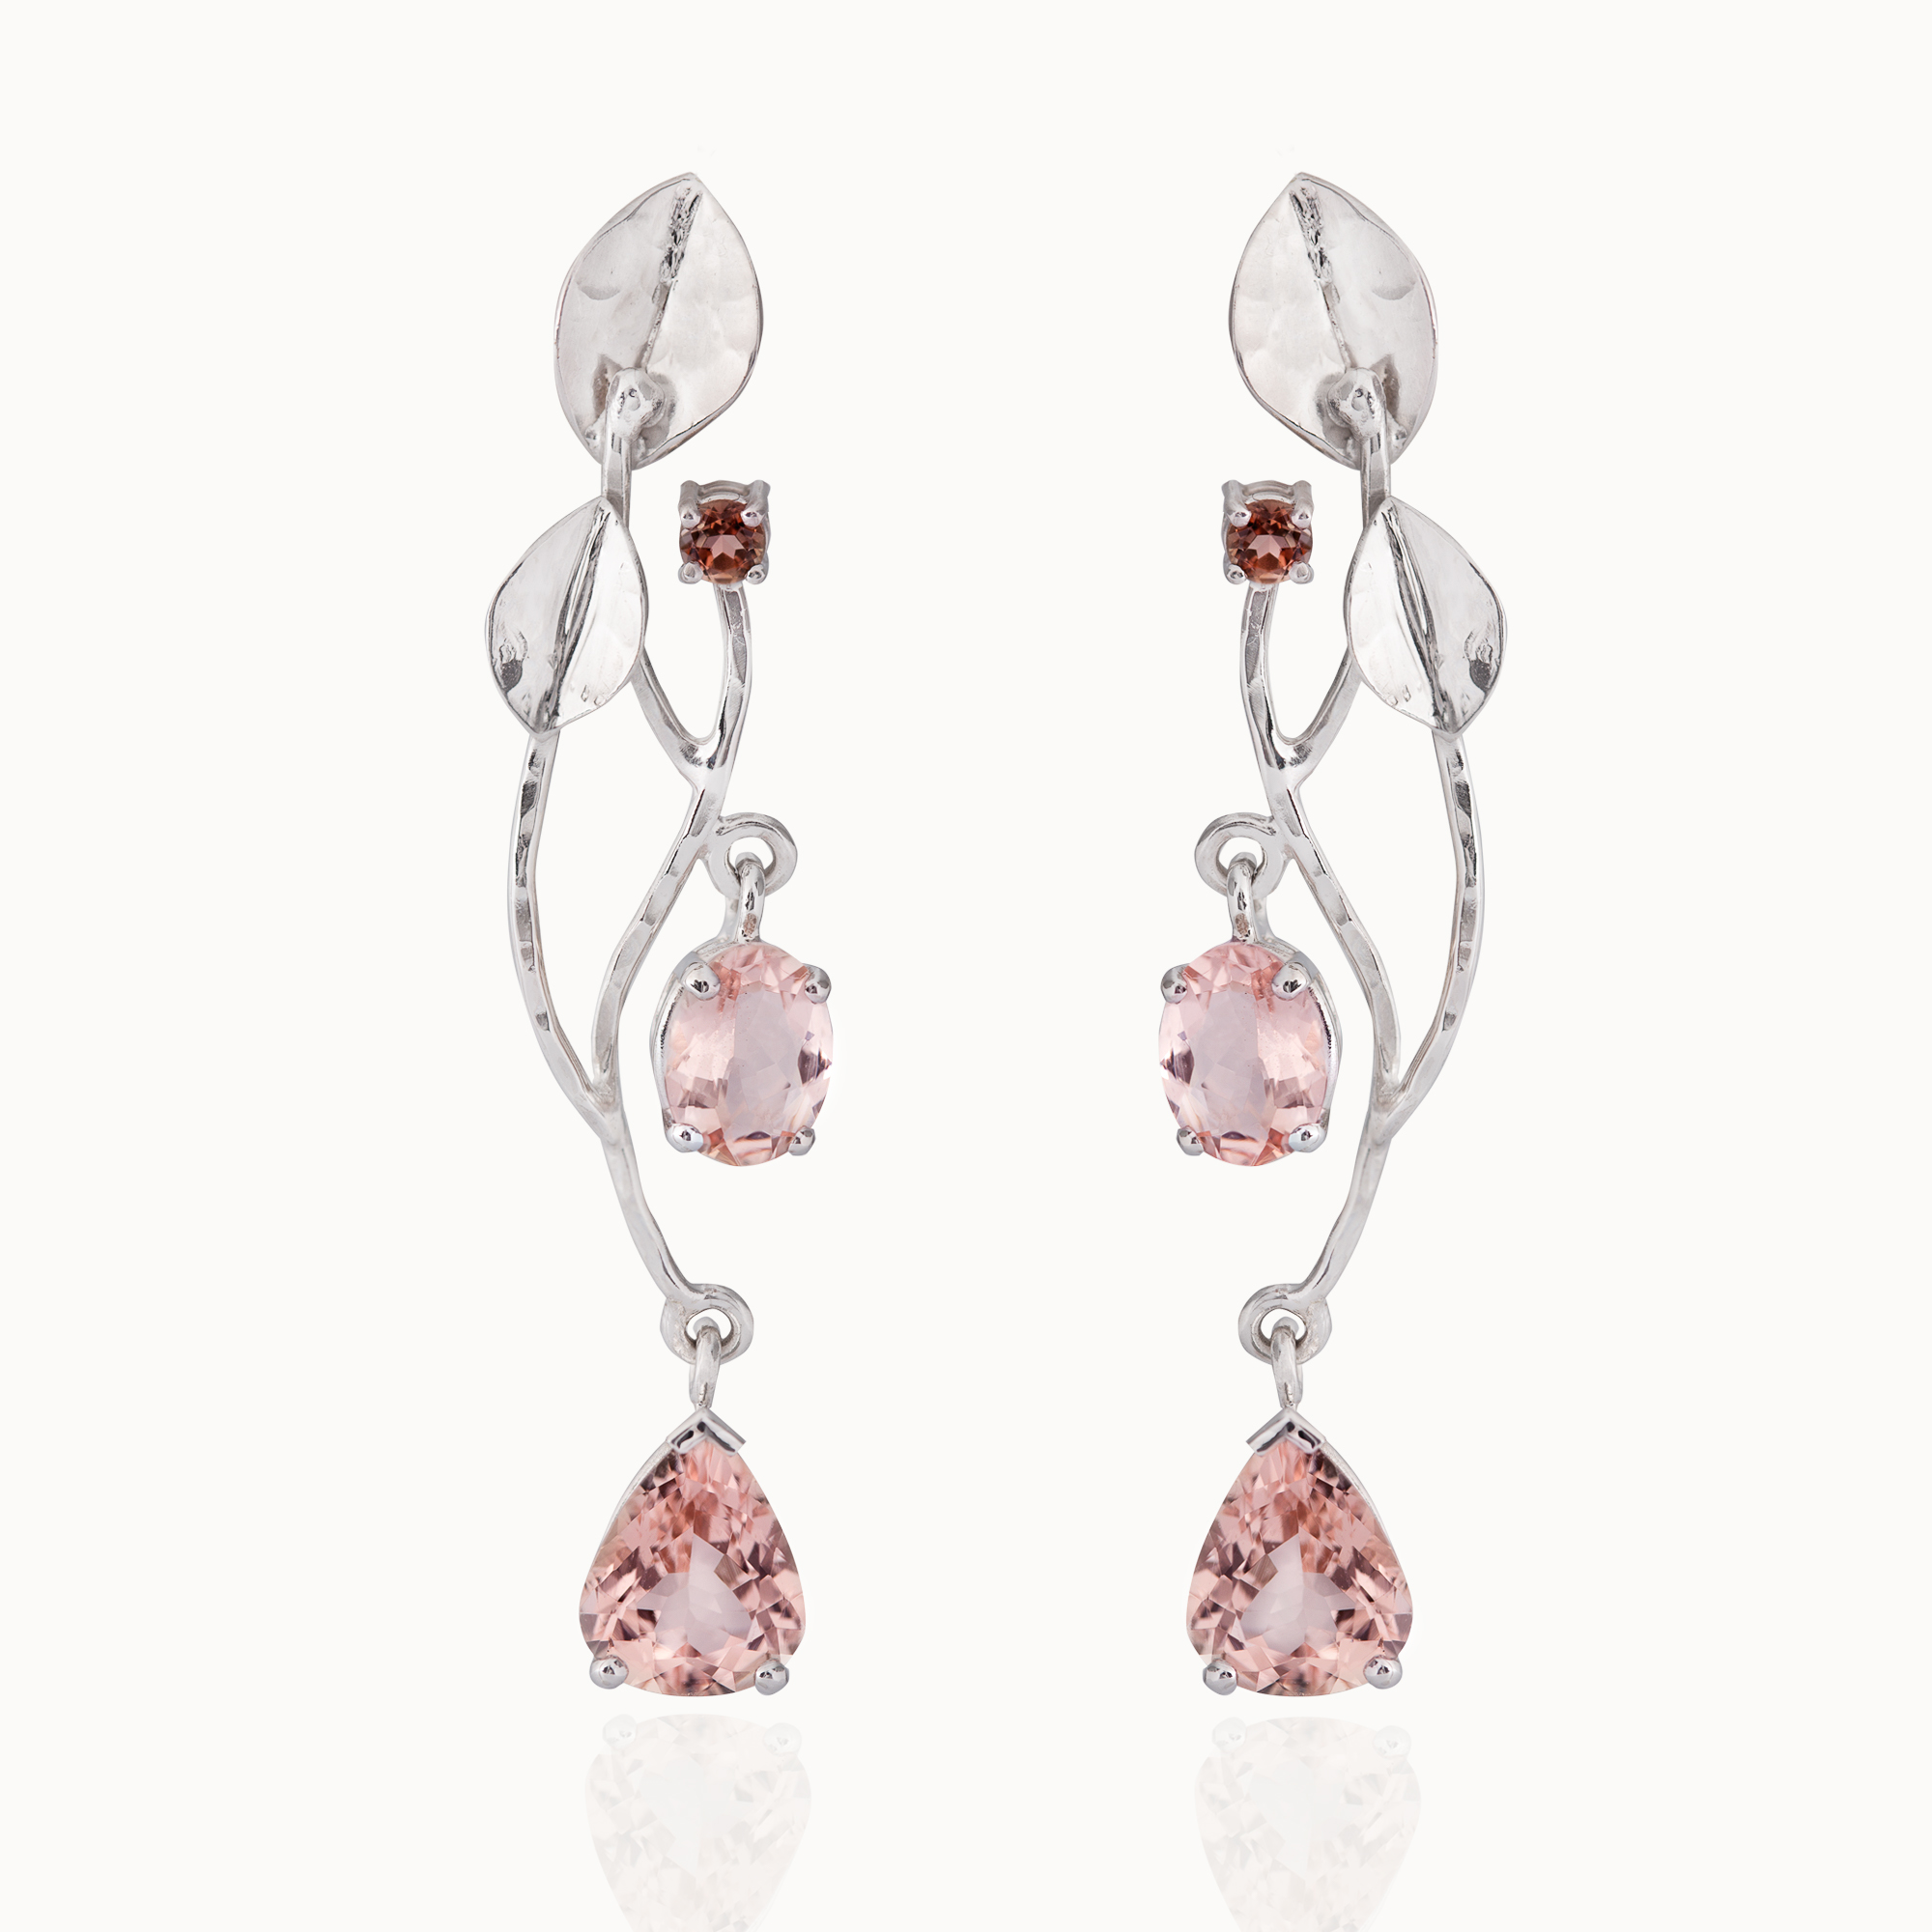 Crafted from 18-karat white gold set with two round, two oval cut and two pear cut morganite gemstones. Handmade by designer Pascale Masselis.